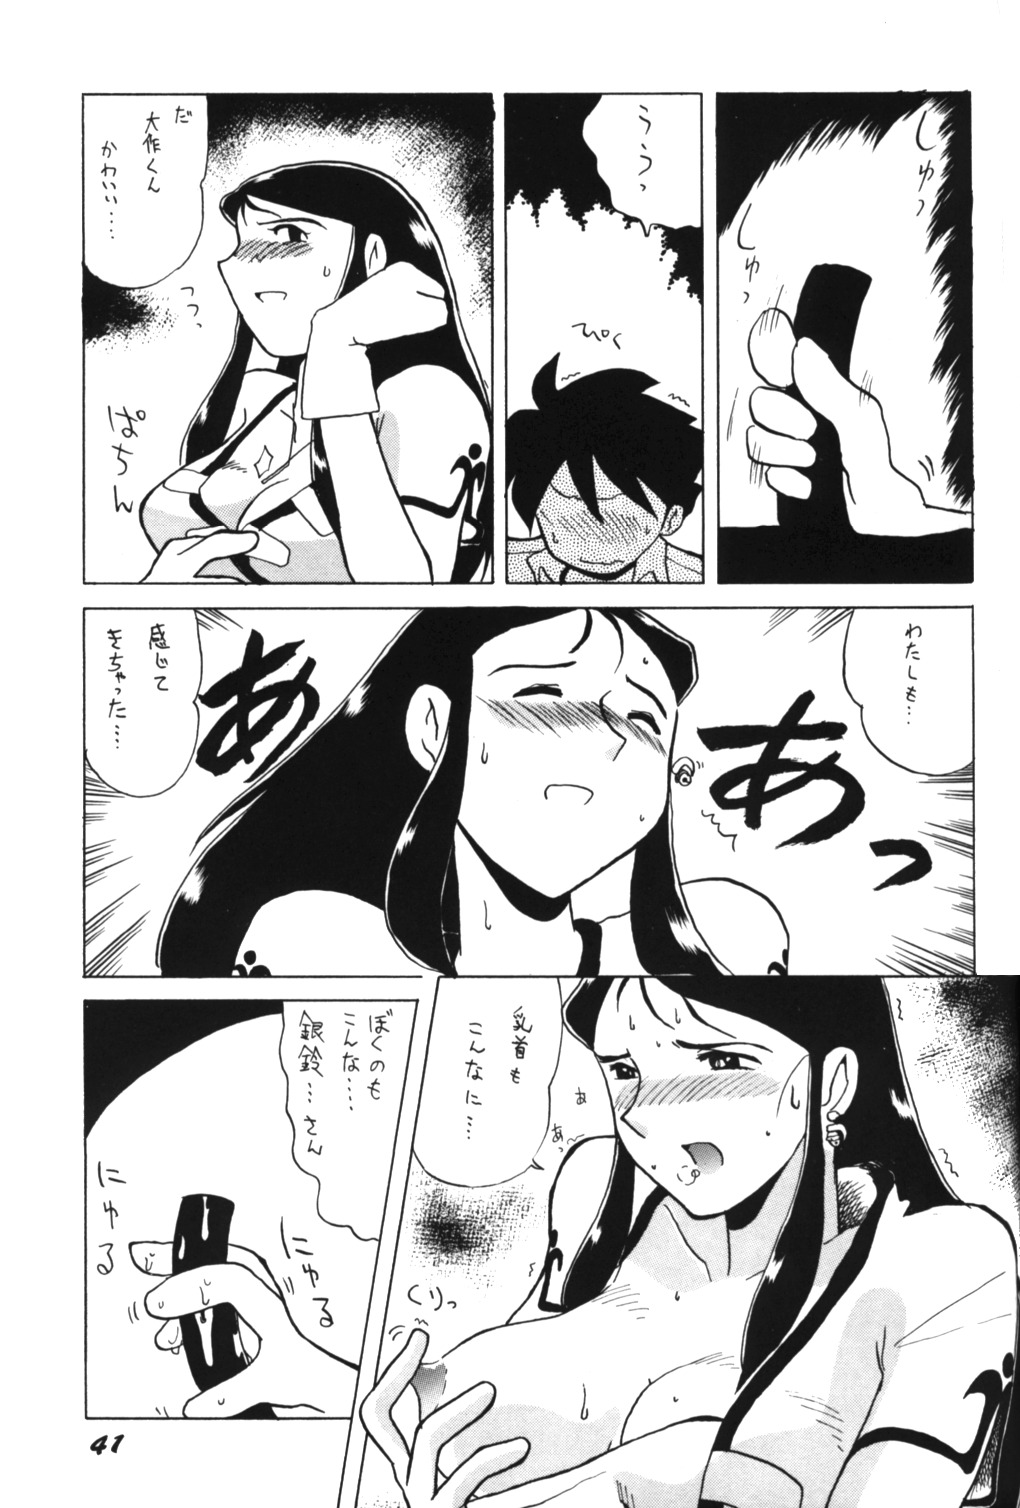 Ginrei Special GR-H (Giant Robo) page 41 full